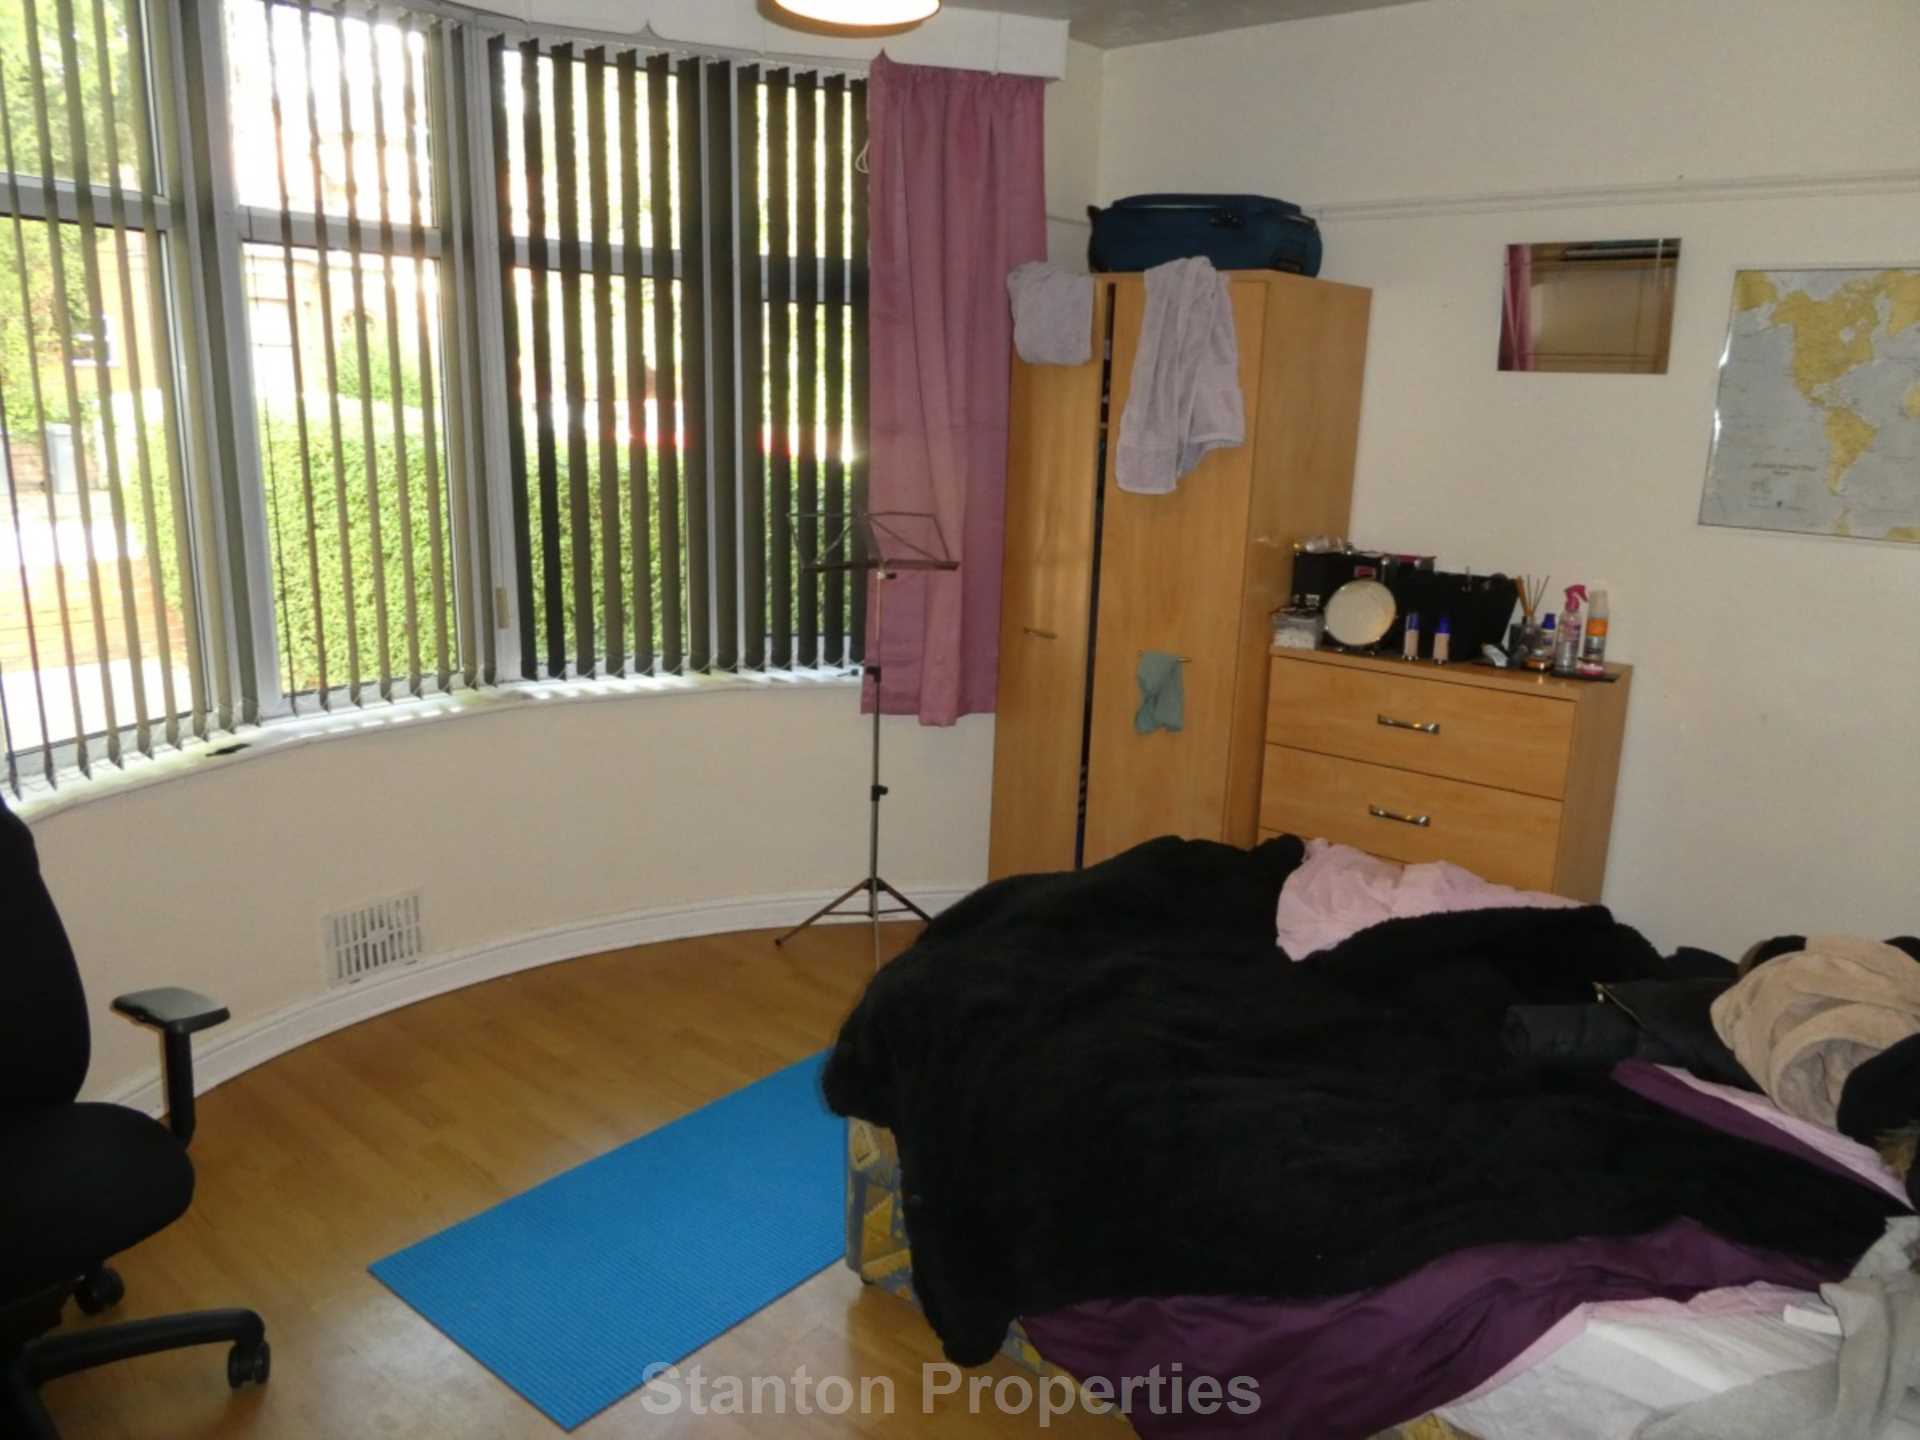 £115 pppw excluding bills, See Video Tour, Mauldeth Road, Withington, Image 4